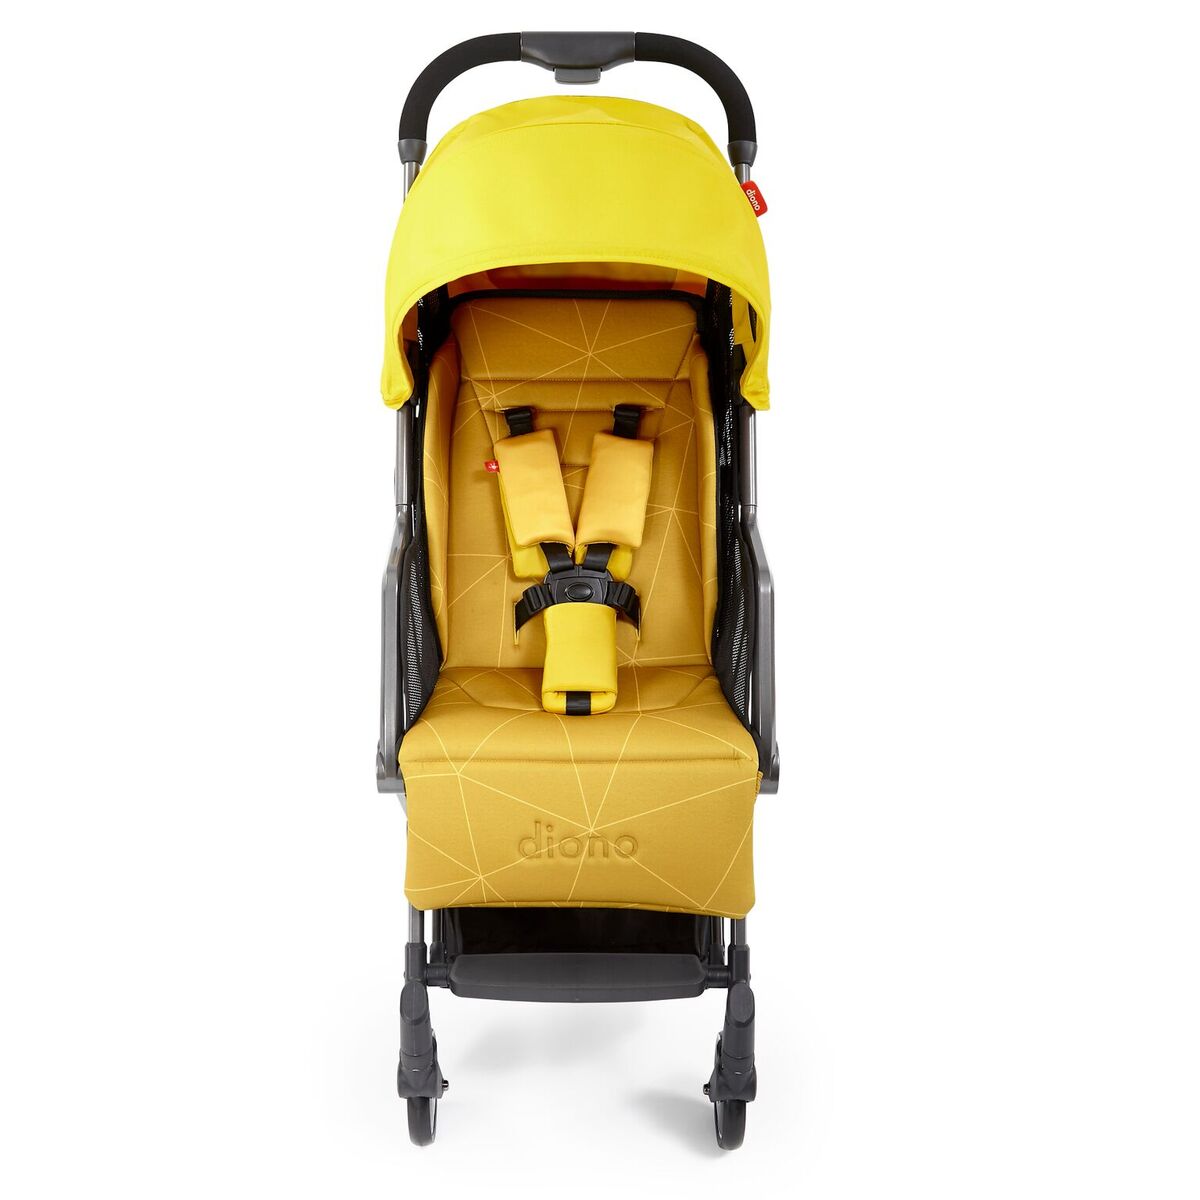 yellow car seat and stroller